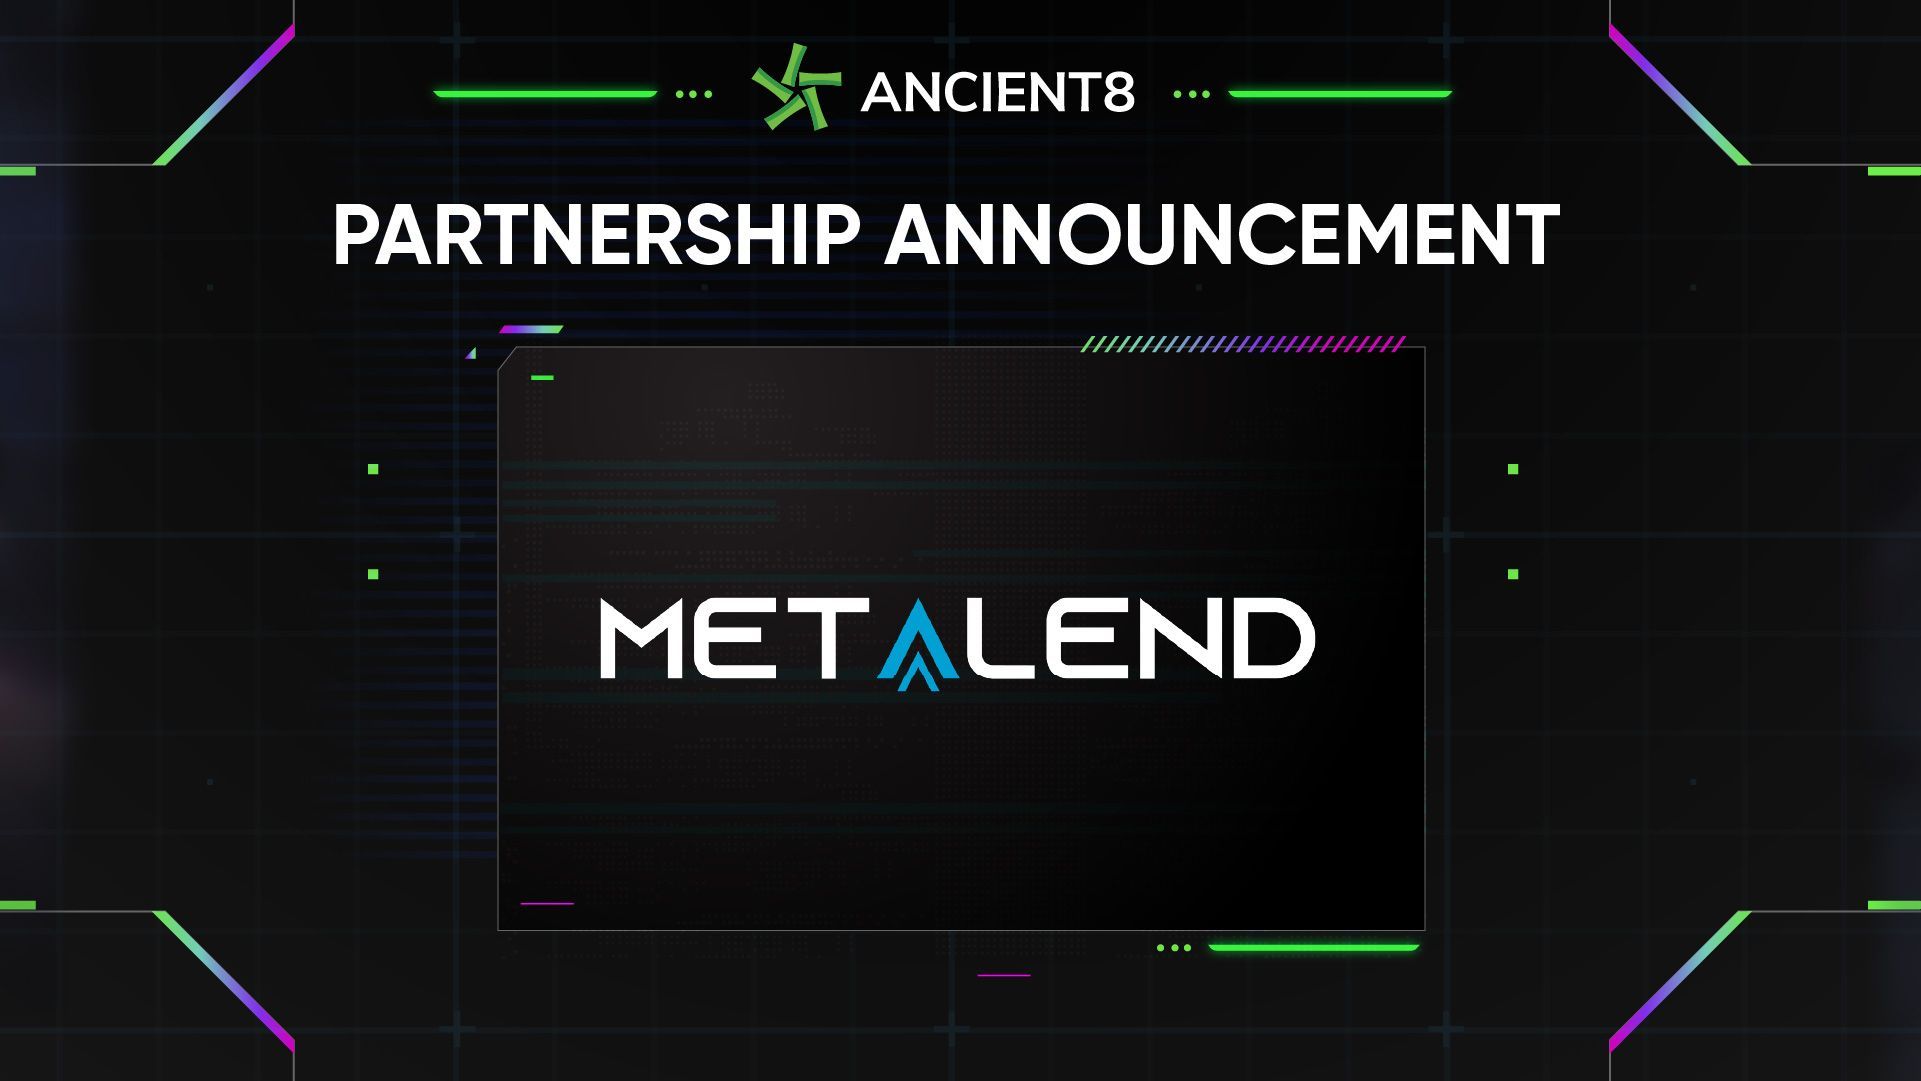 Ancient8 partners with MetaLend, the Bank of the New Digital Economy